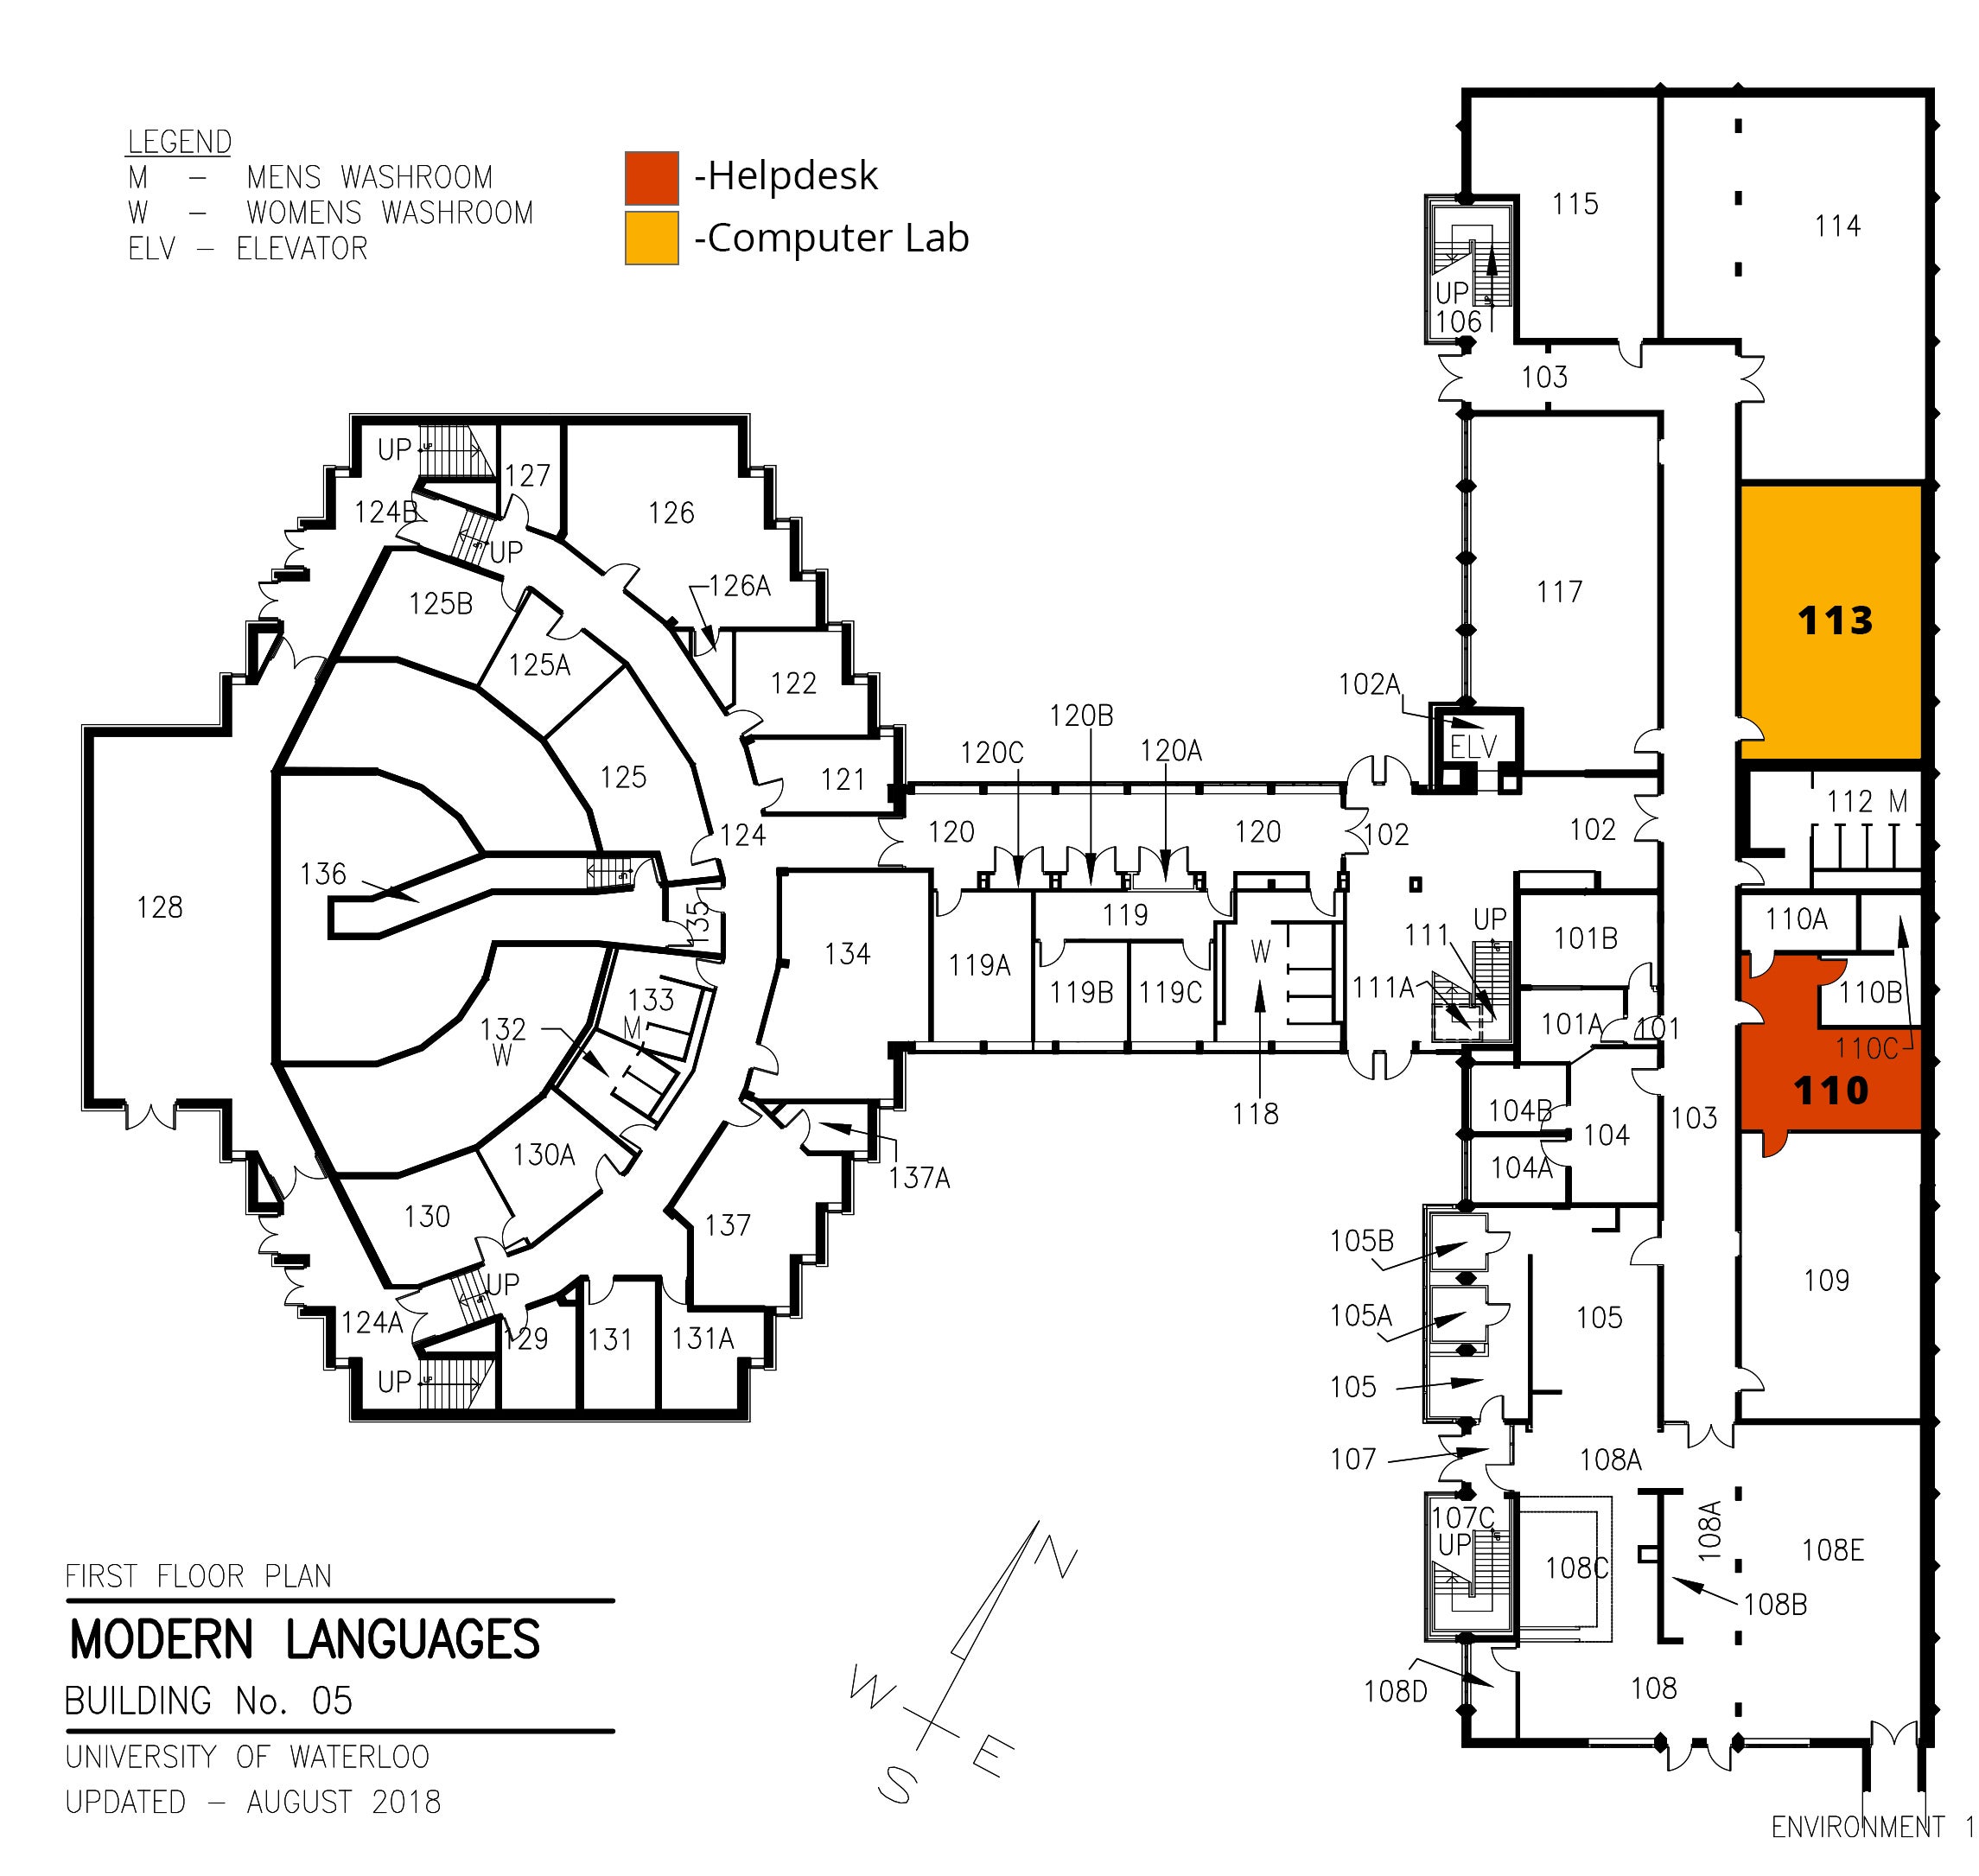 A map of the arts computing office's facilities in the Modern Languages building. There is a computer lab in ML-113 and a helpdesk in ML-110.